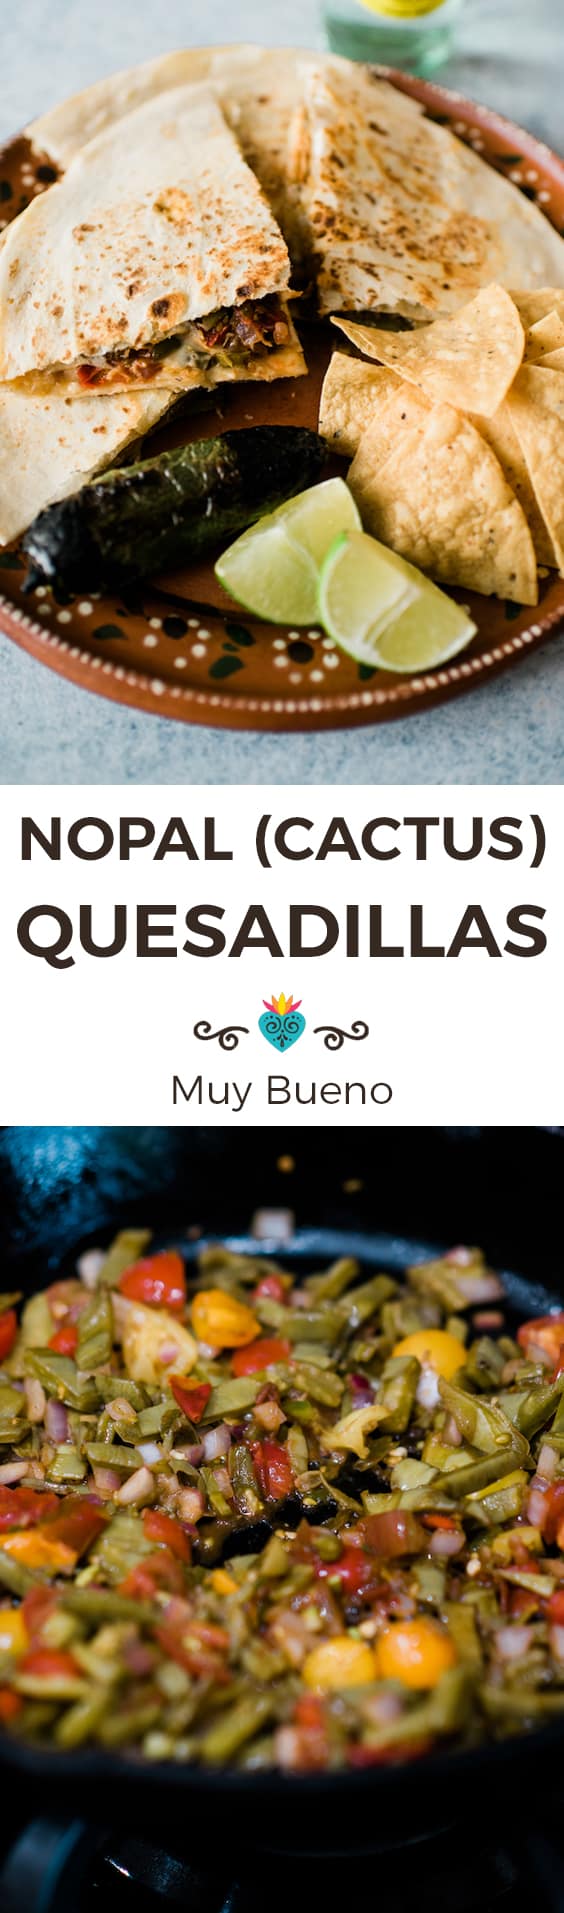 Cactus Nopal Quesadillas collage with text overlay